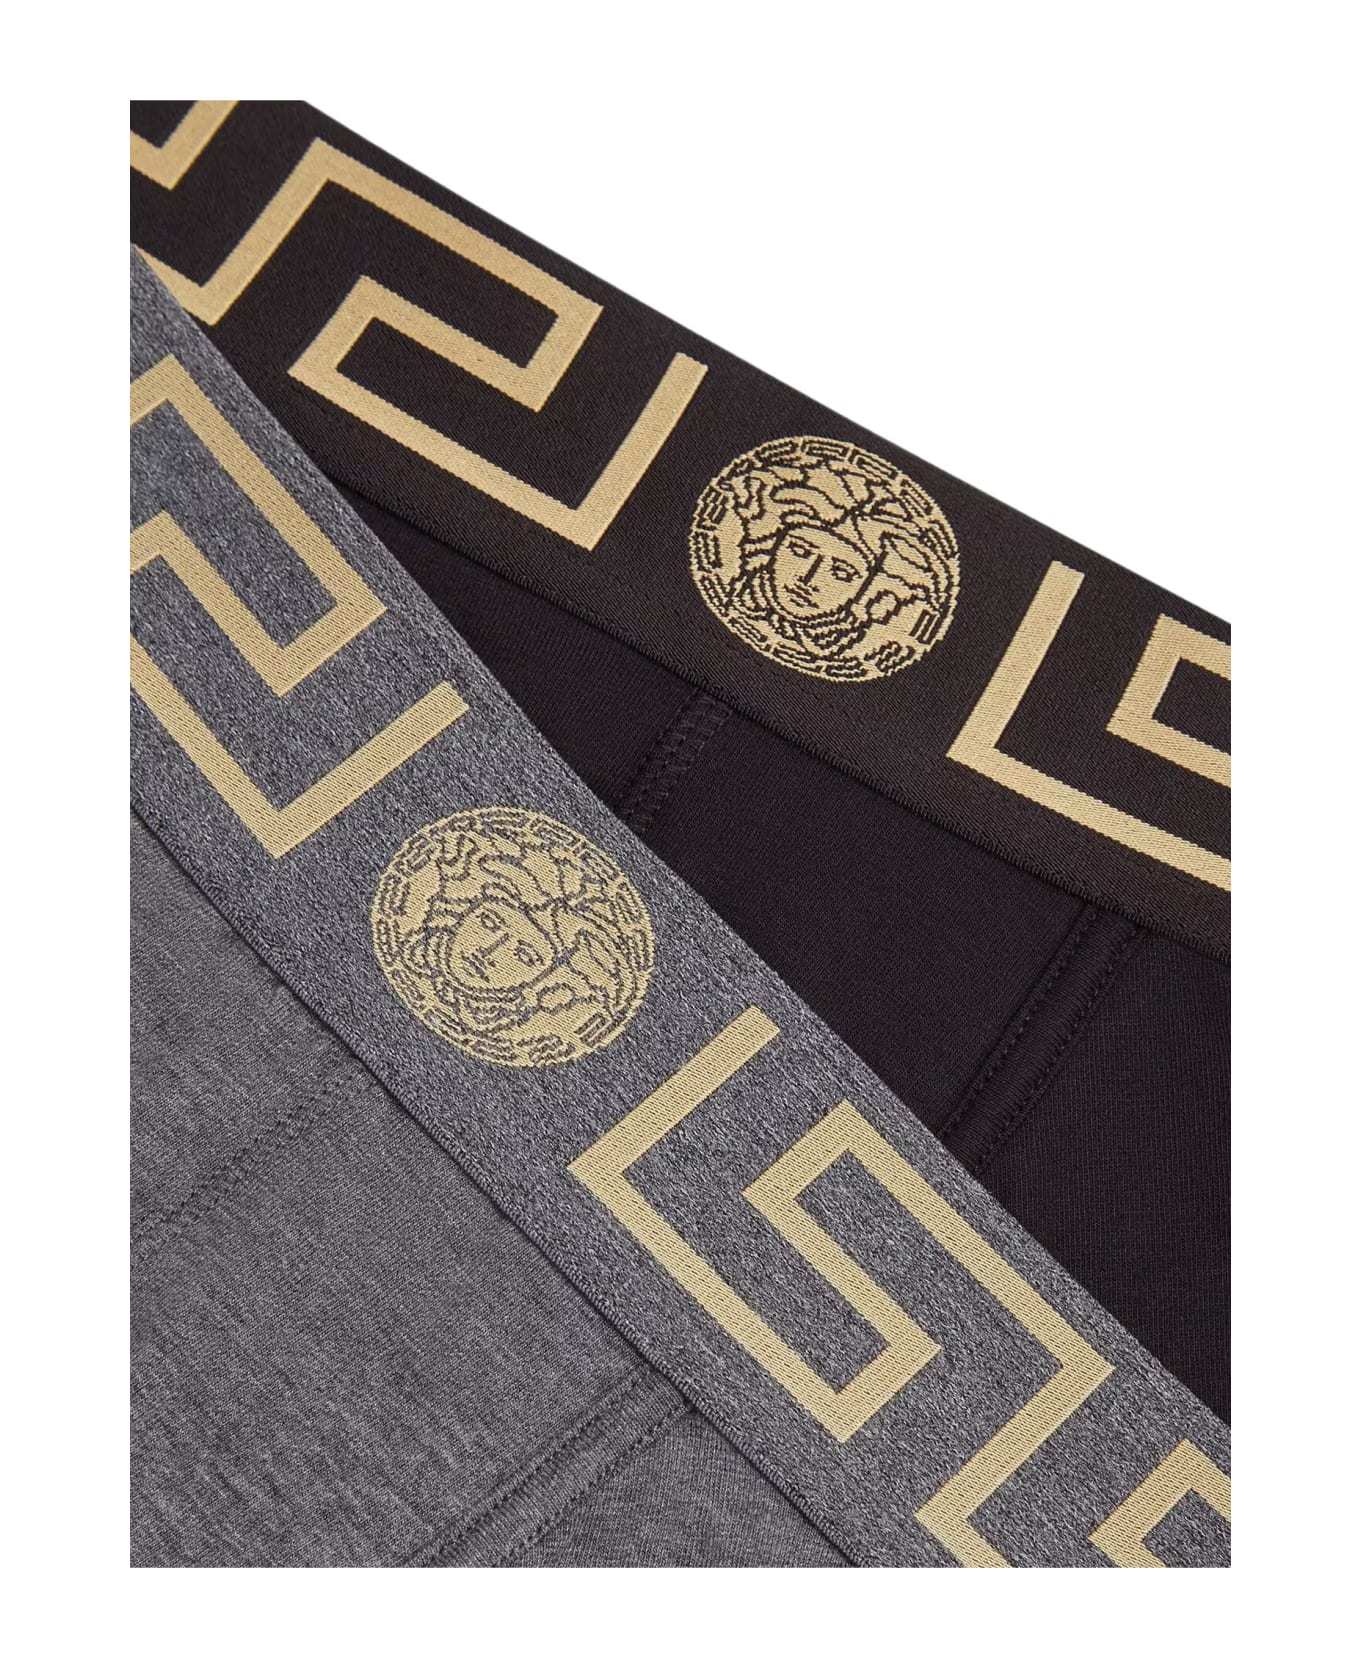 Versace Pack Of Two Boxer Shorts With Greek Motif - BK/GR